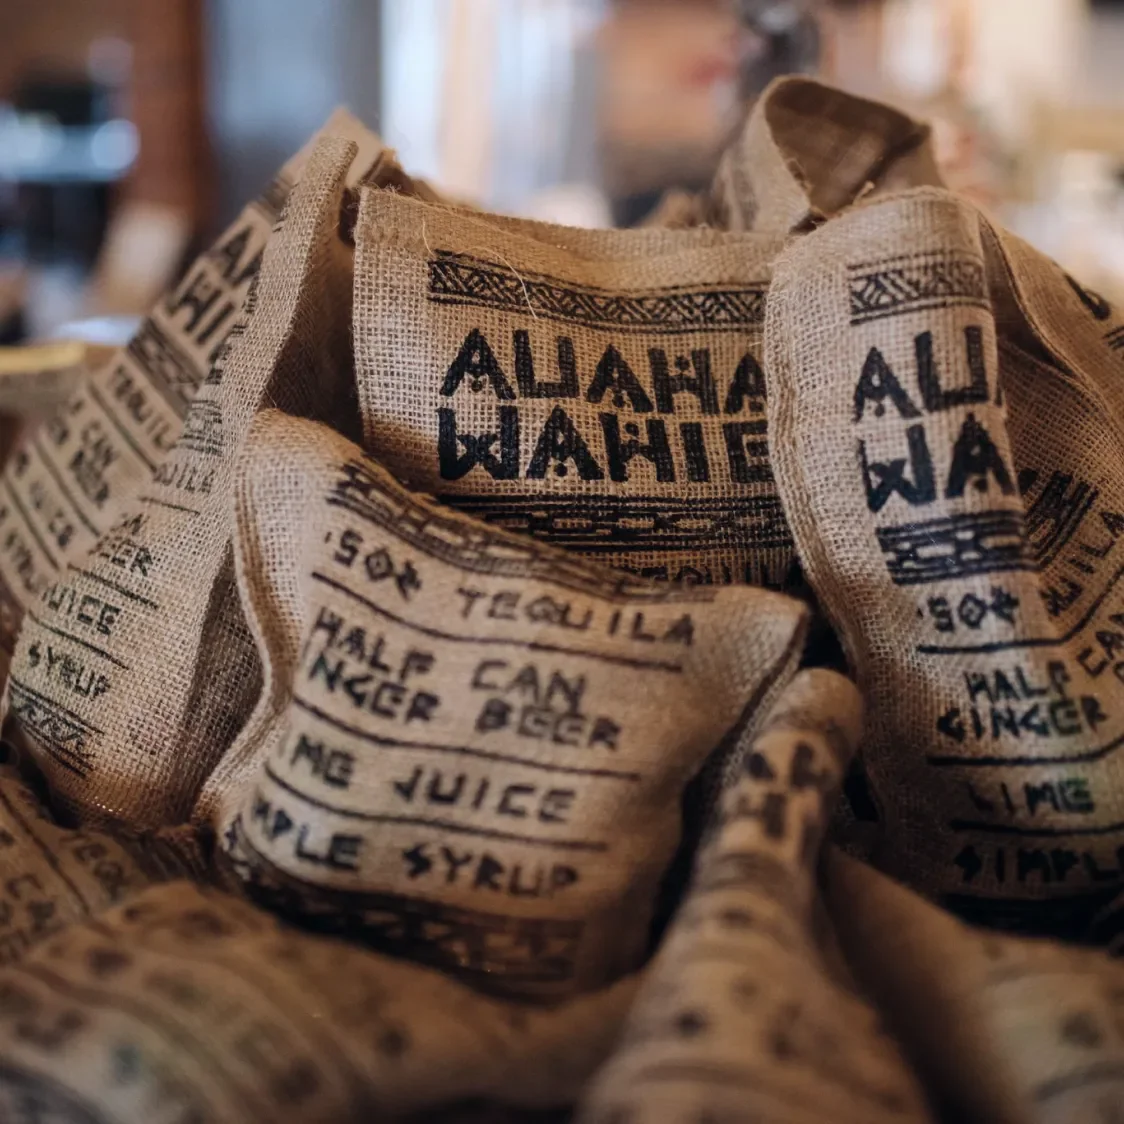 Close-up of pile of cloth sacks containing a cocktail ingredients with the contents screen printed on the front